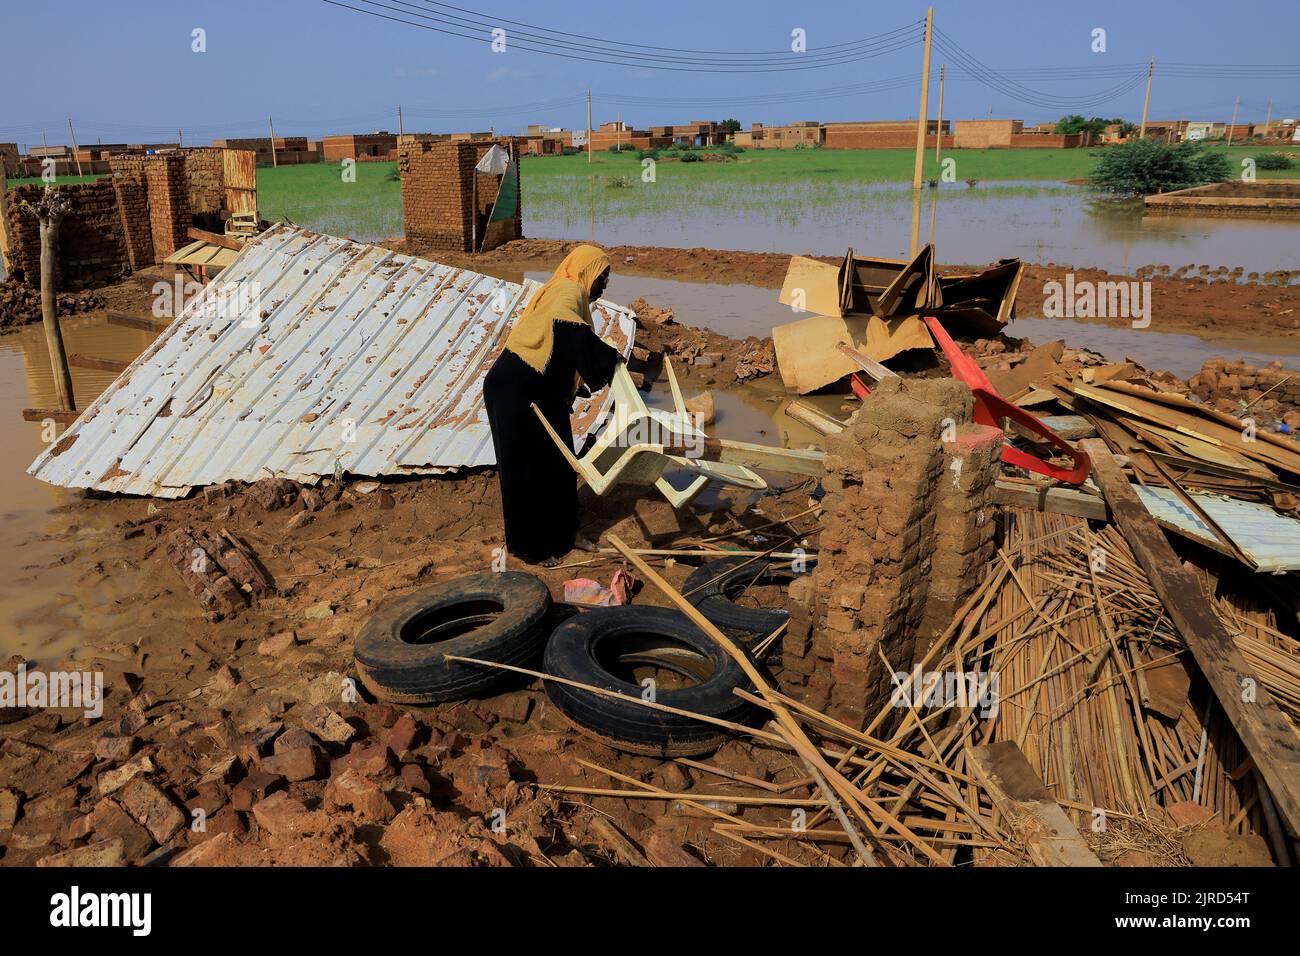 A woman collects her belongings after sustaining water damage to her house during floods in Al-Managil locality, in Jazeera State, Sudan August 23, 2022. REUTERS/Mohamed Nureldin Abdallah Stock Photo